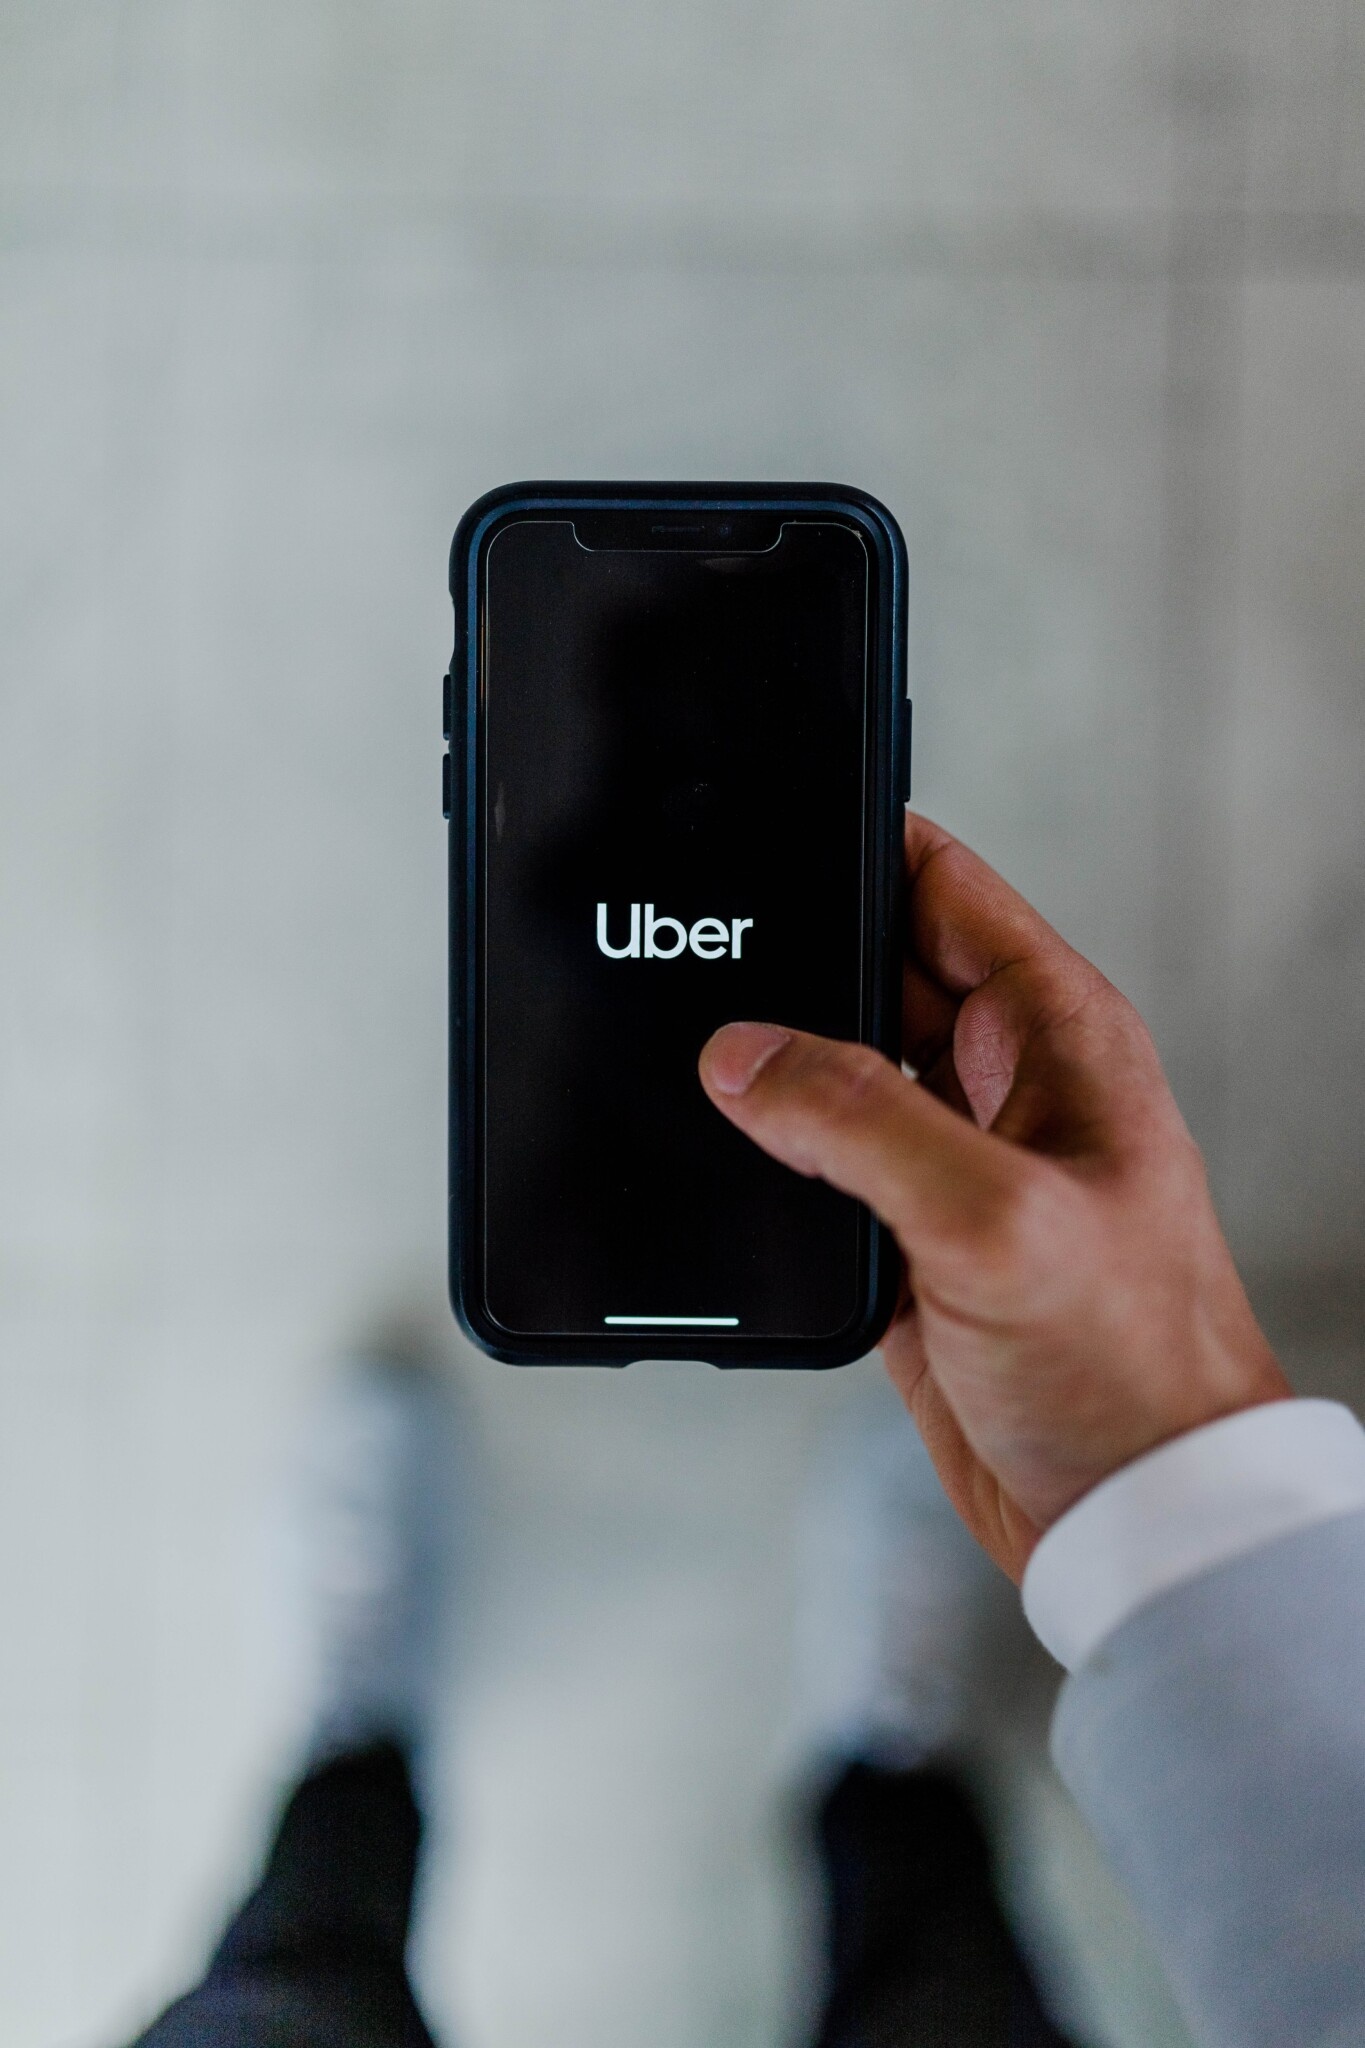 Uber: The world's largest ride-sharing company, The Uber app on a mobile device. 1370x2050 HD Wallpaper.